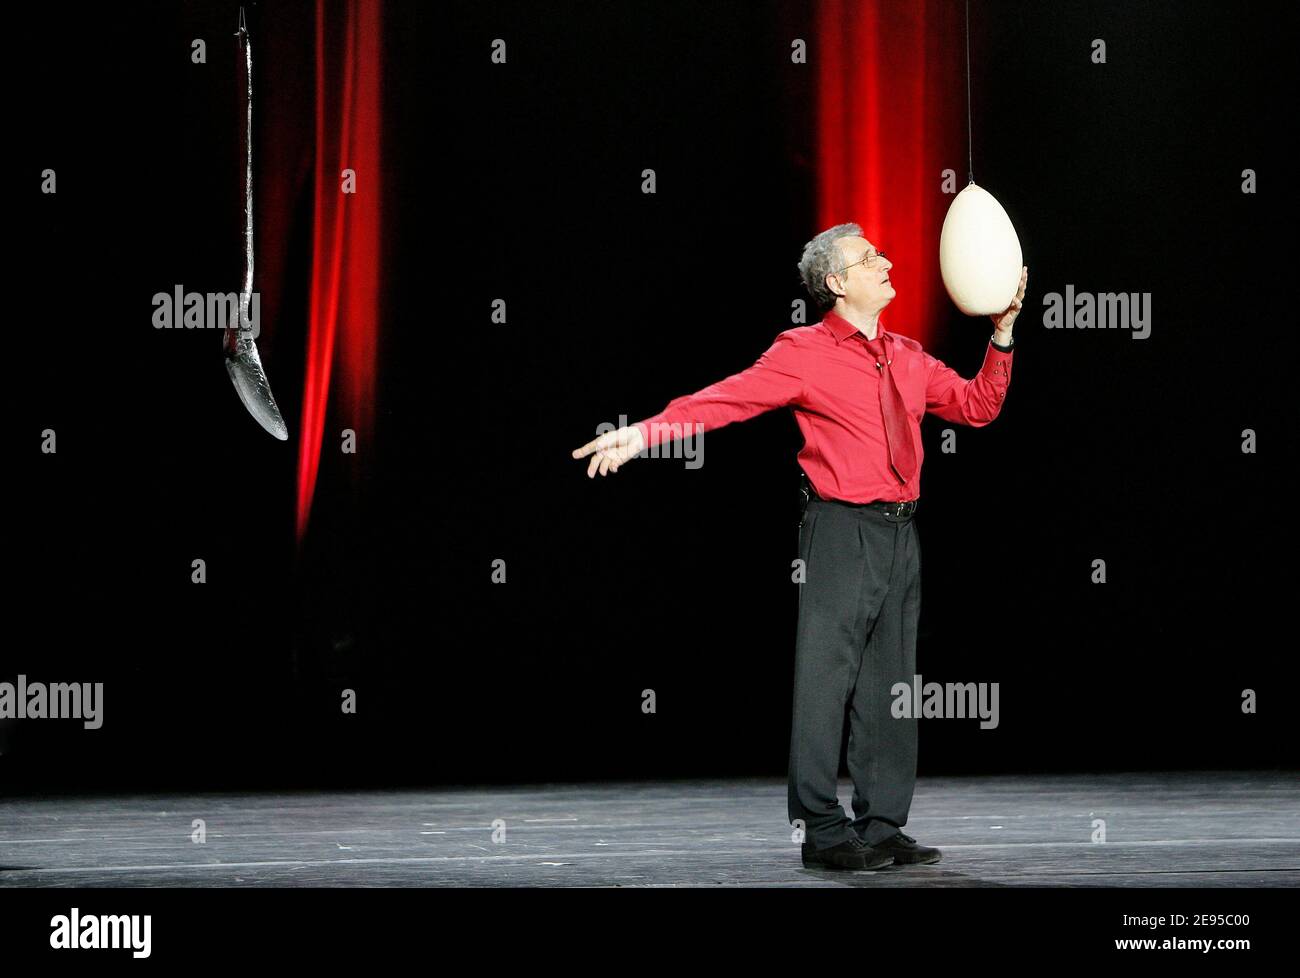 French humorist Daniel Prevost on stage during his last show at the Olympia in Paris, France on january 16, 2006. Photo by Thierry Orban/ABACAPRESS.COM Stock Photo